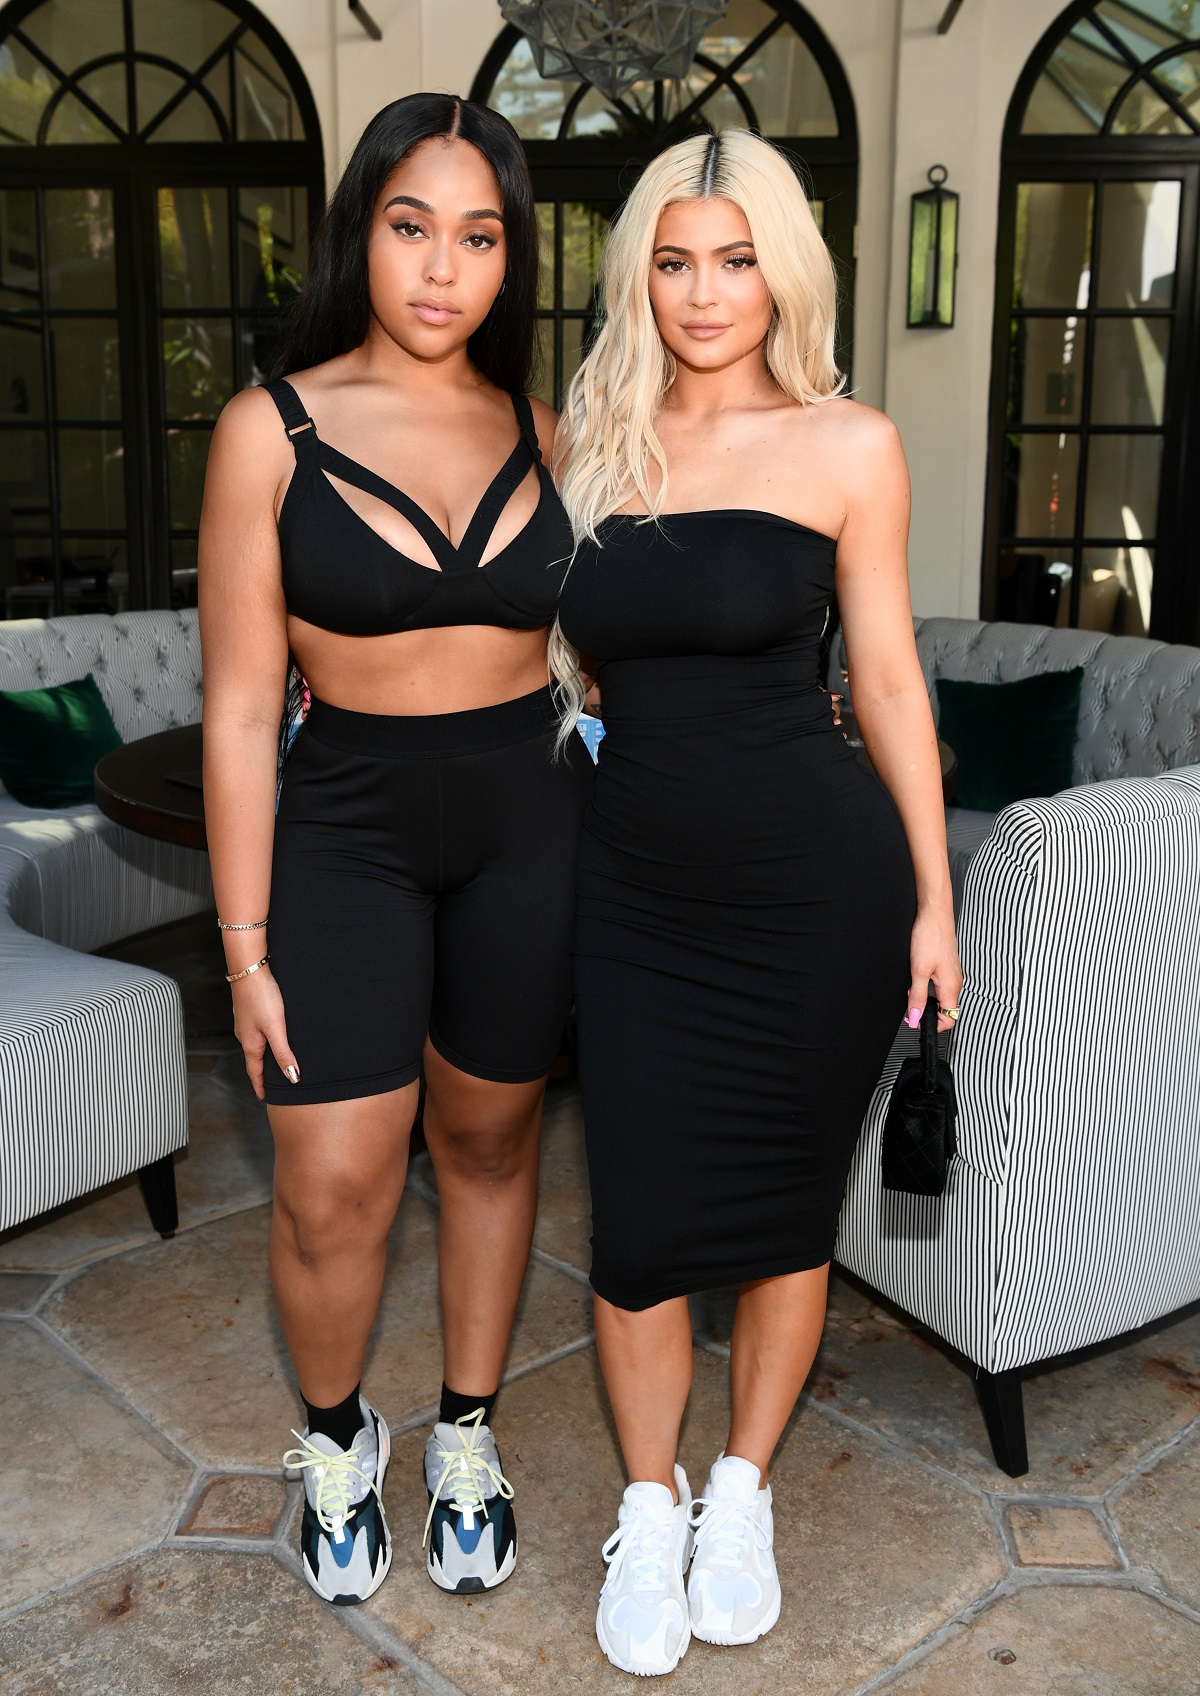 Jordyn Woods and Kylie Jenner pose for photo at launch event of Woods' activewear label SECNDNTURE